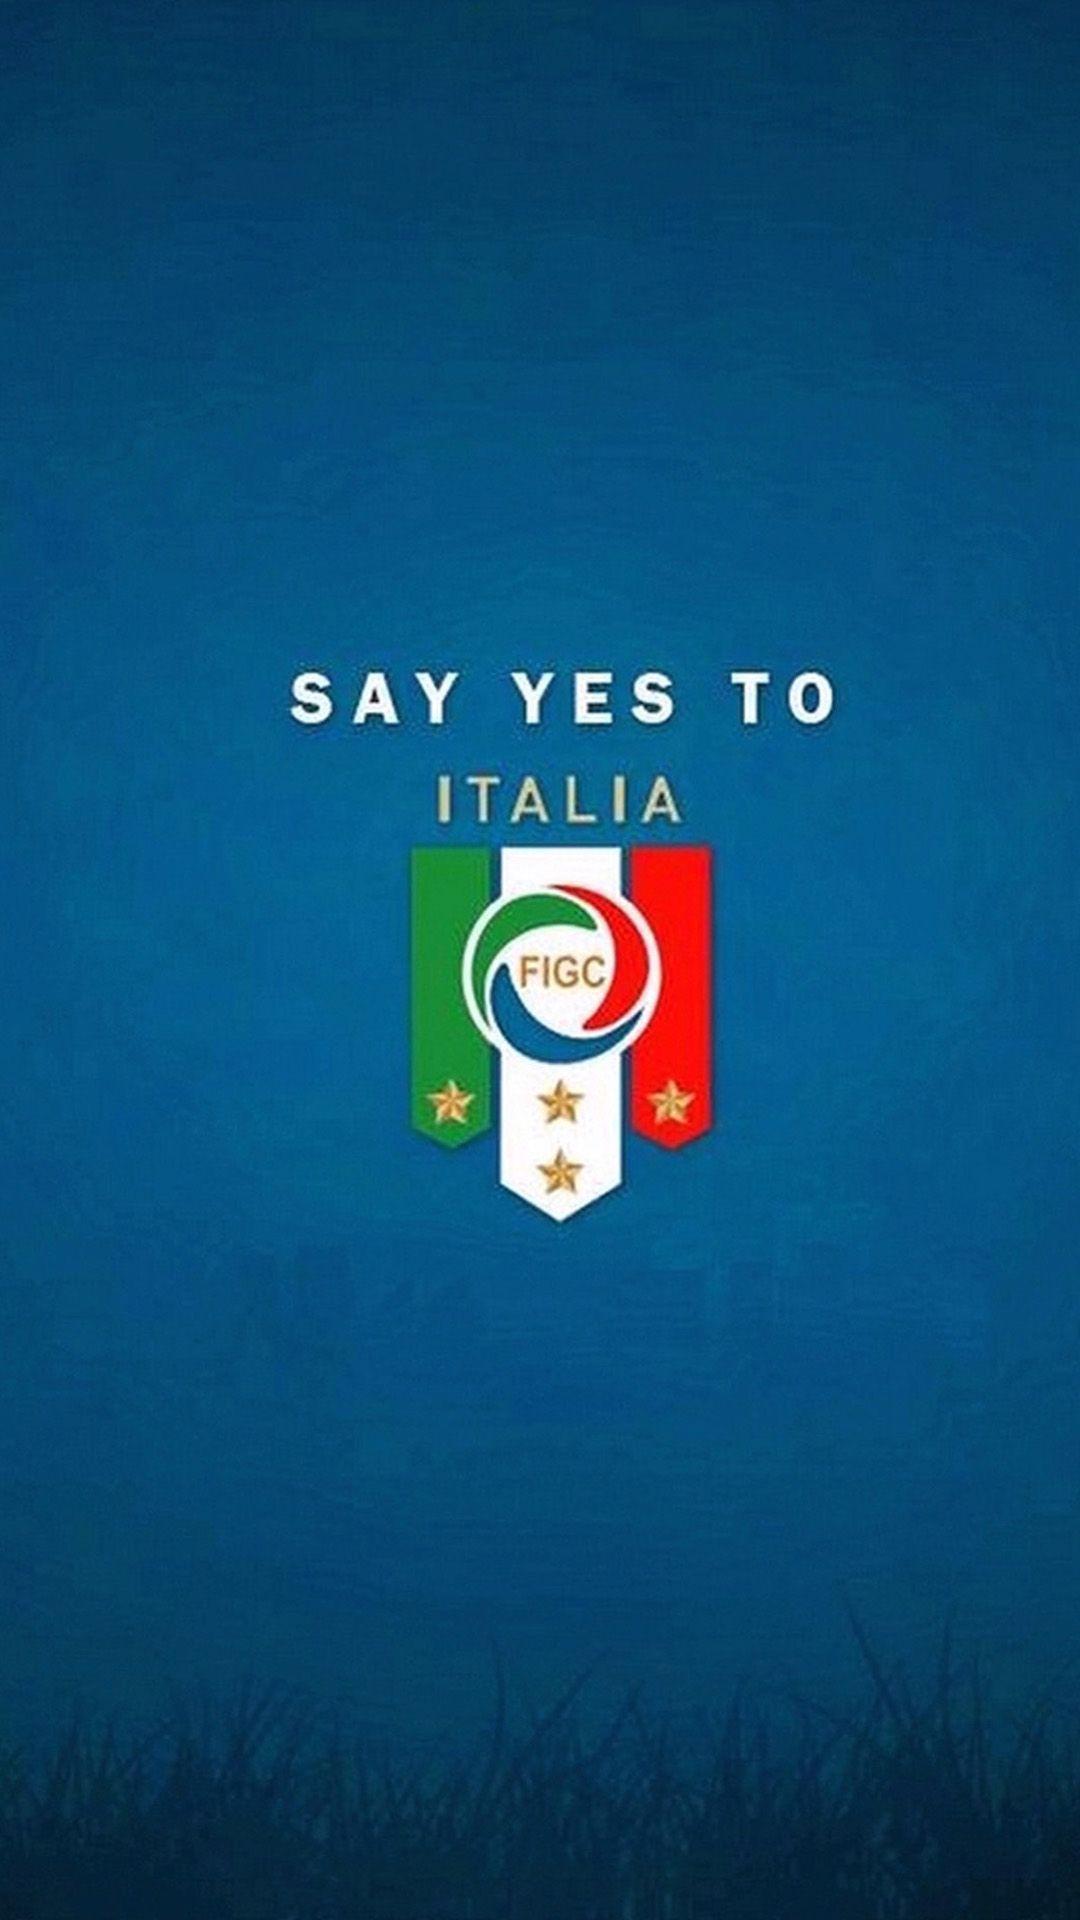 SAY YES TO ITALIA Htc One M8 htc one wallpaper. HTC One